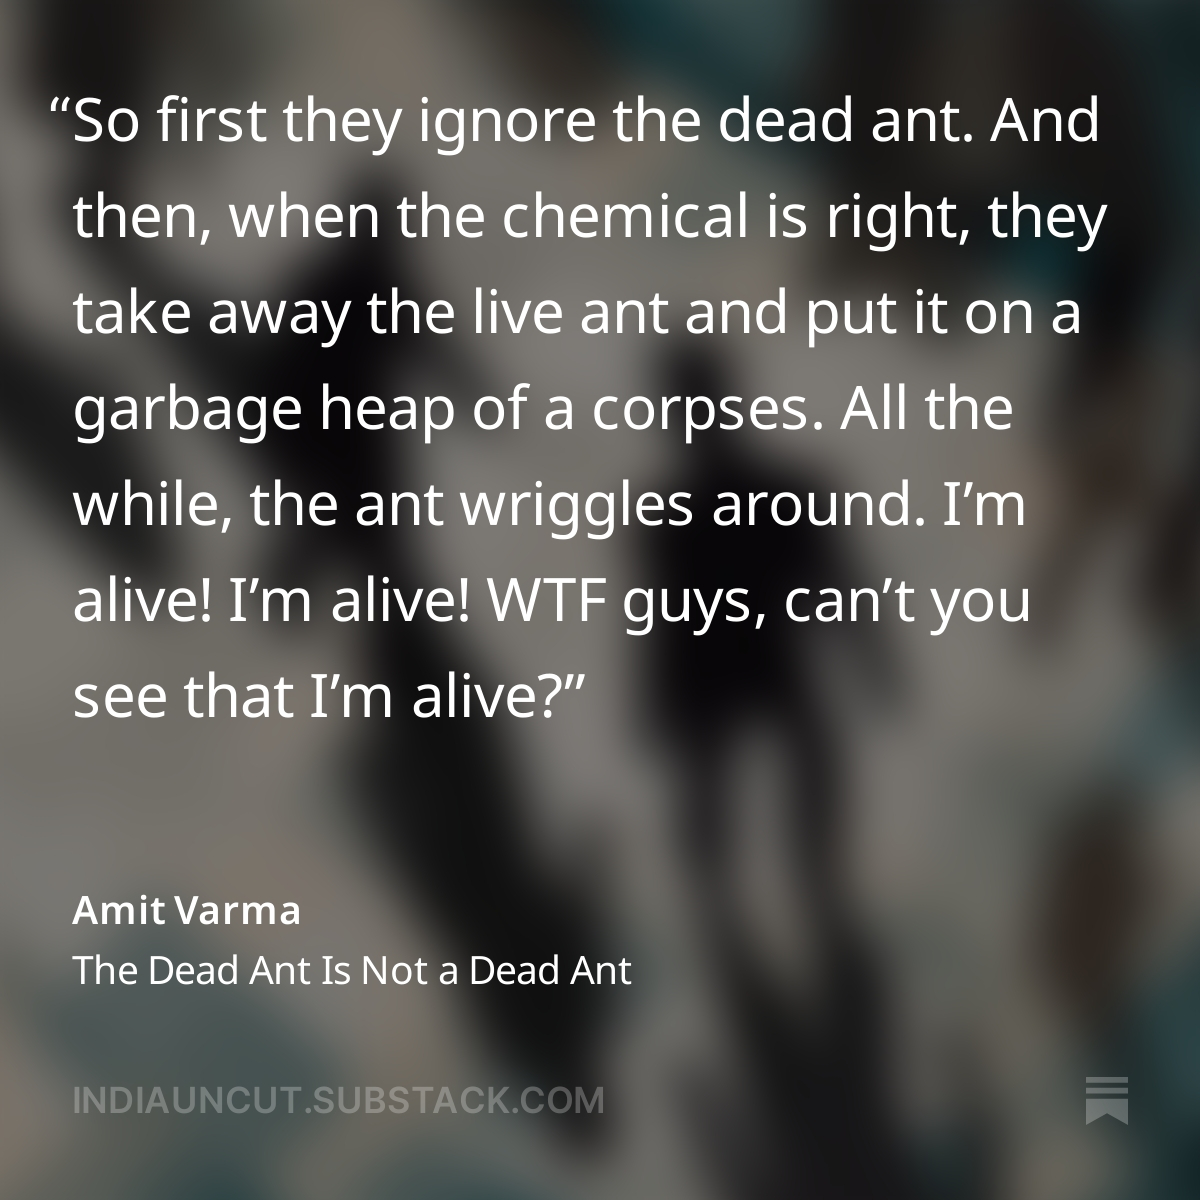 My latest newsletter post is a quick story about ants that has everything to do with us. (Type the link in the image to read it.)